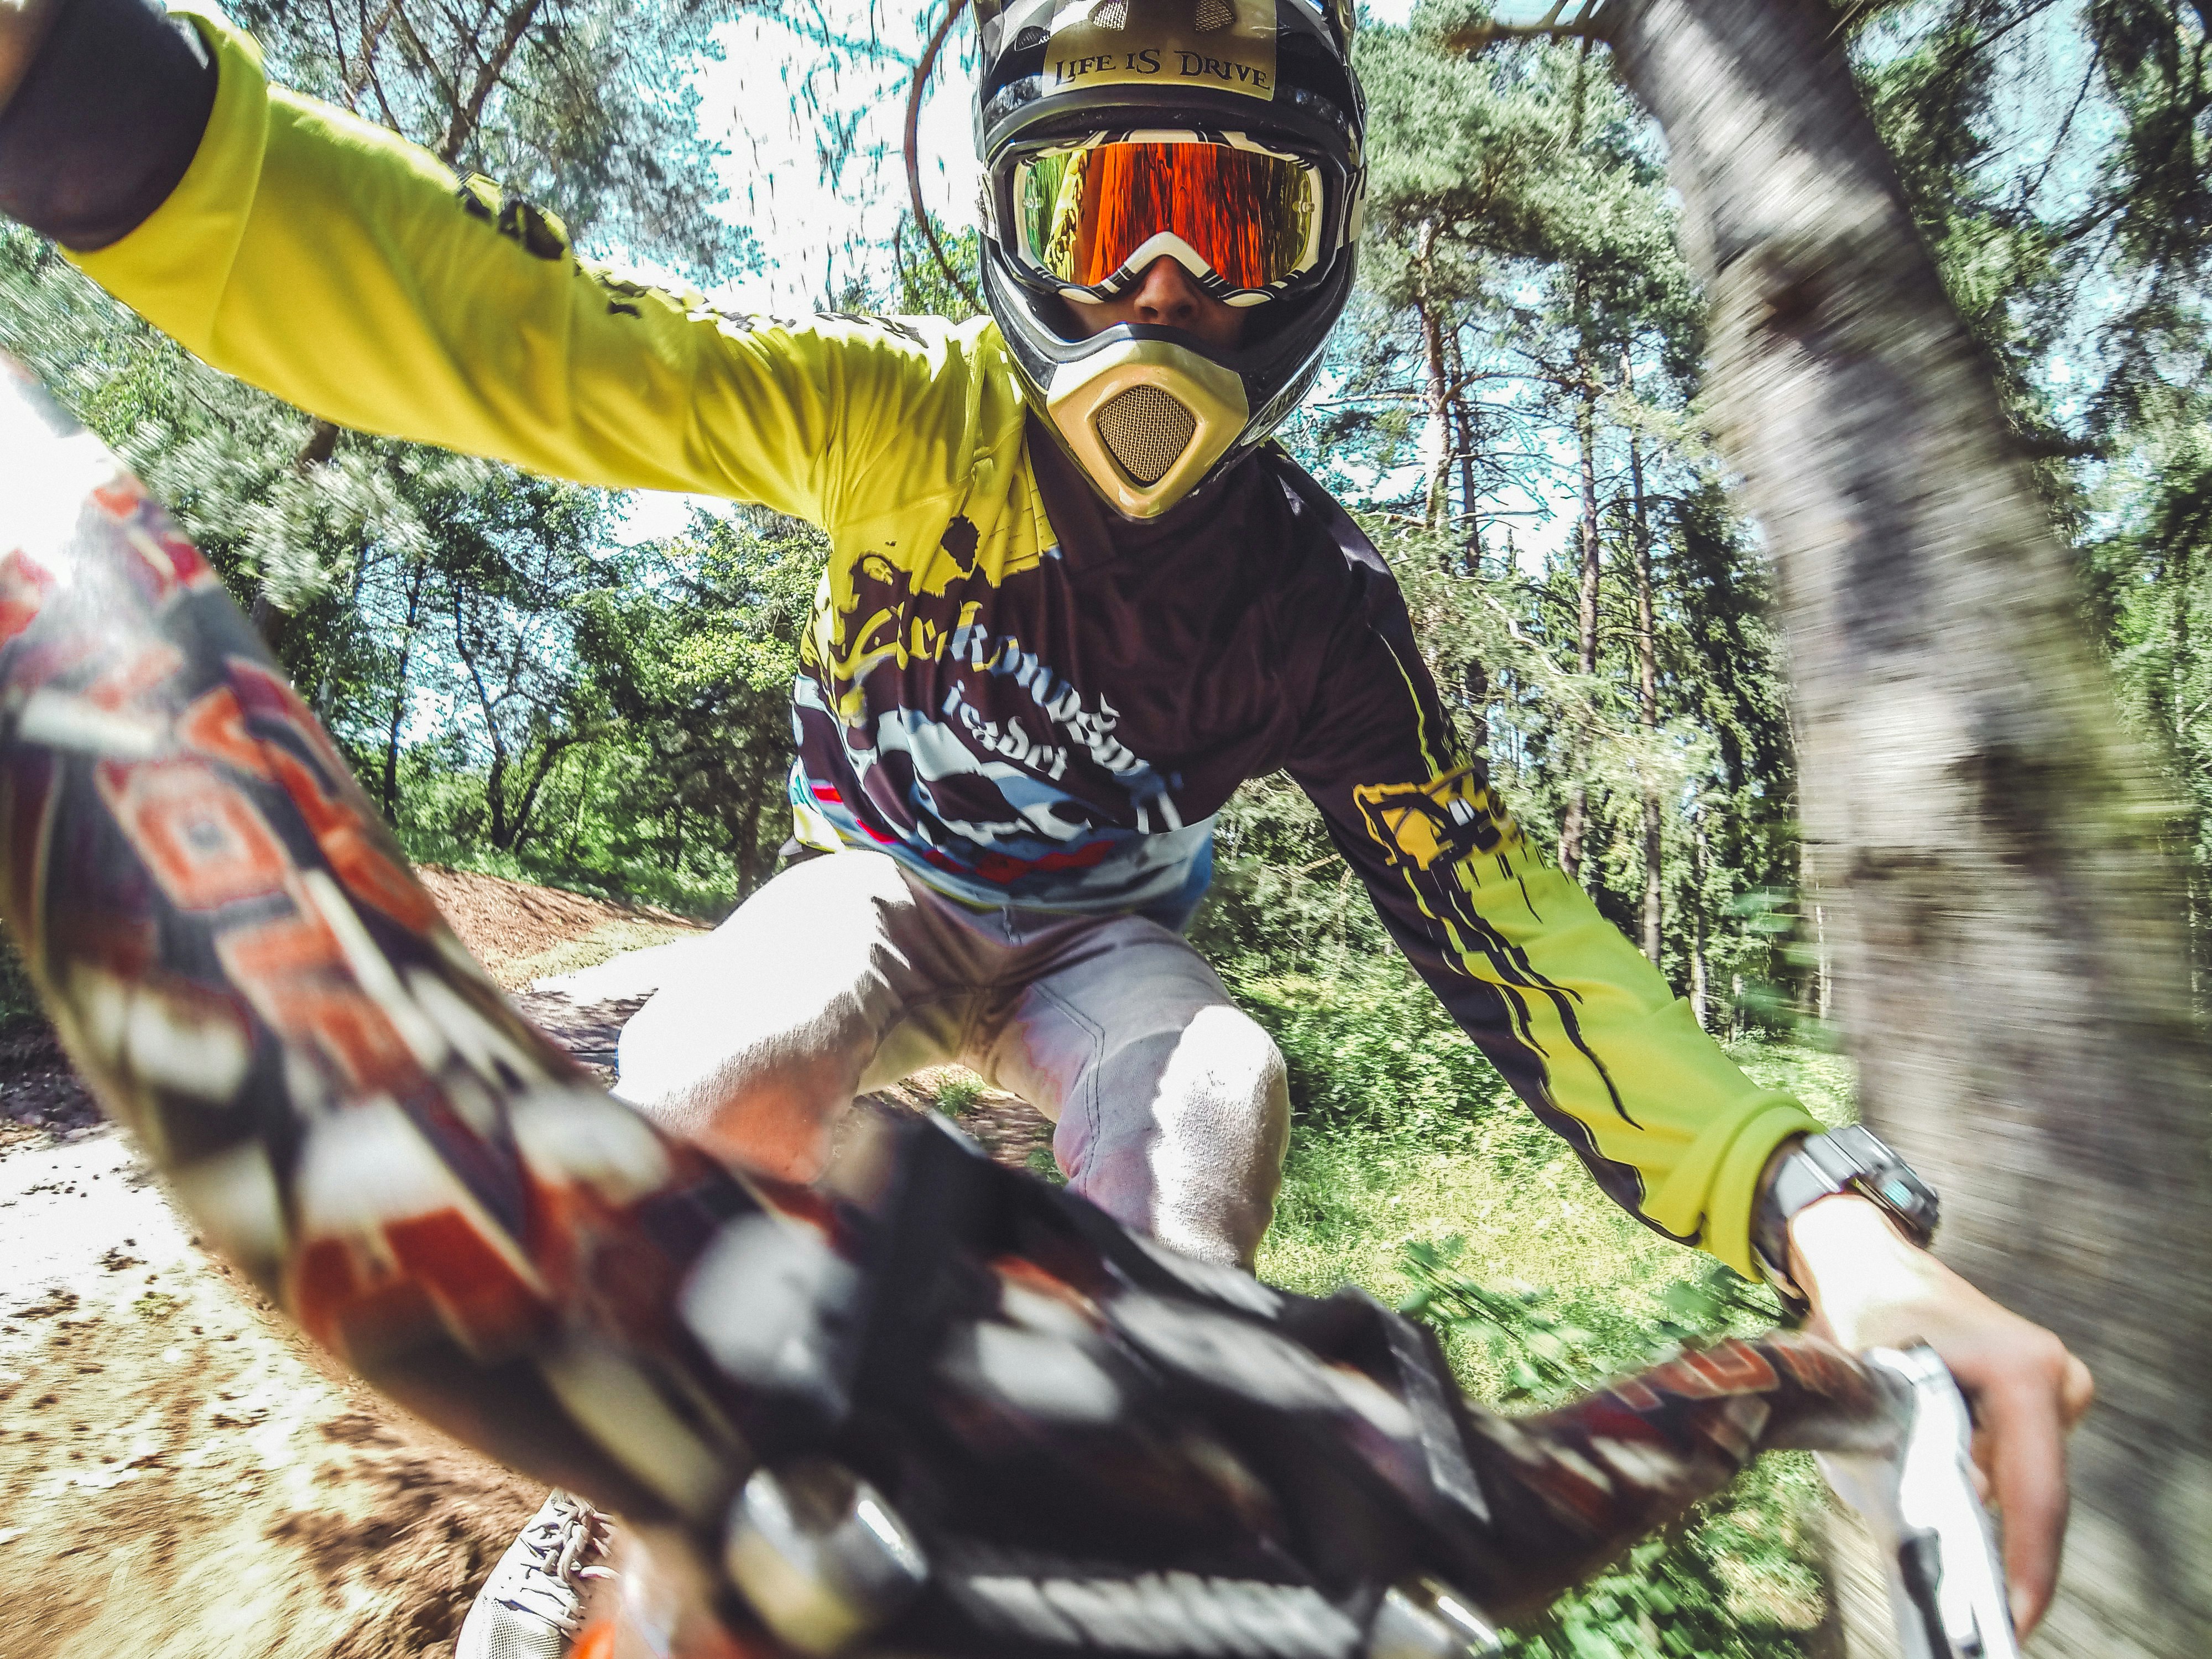 MTB Rider jumping in the forrest in high speed